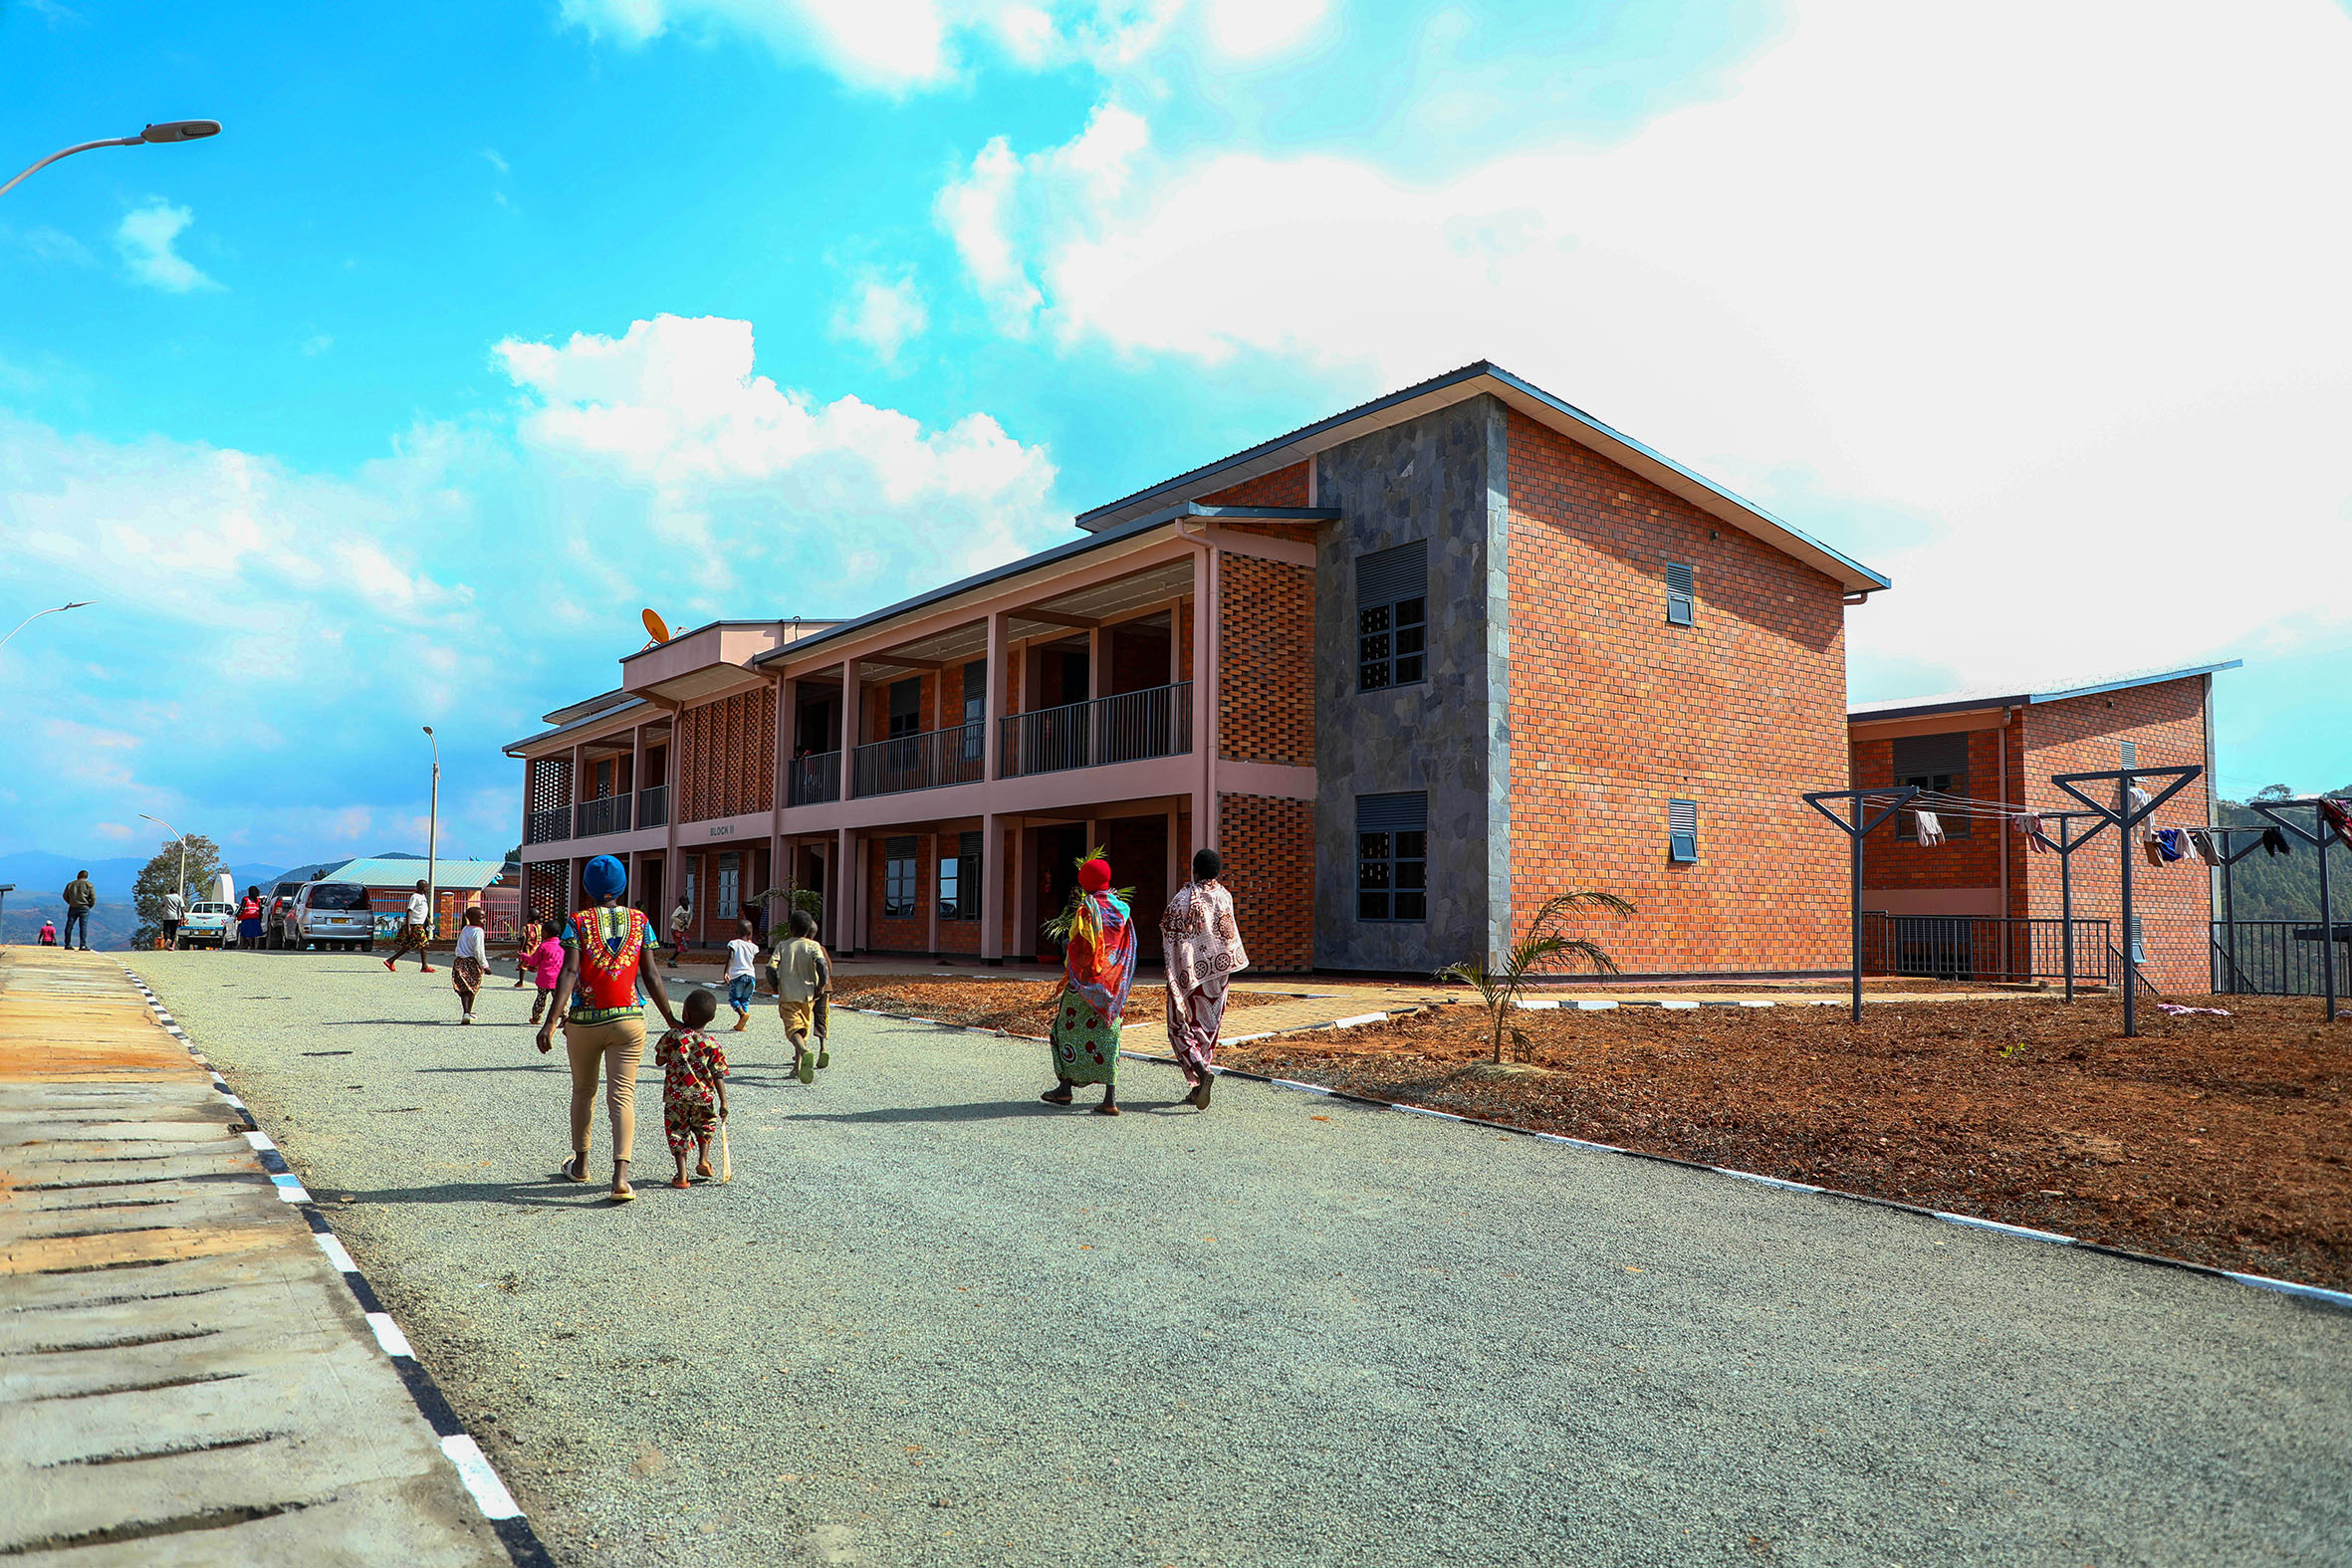 NEW HOME: Residents walk past one of the newly constructed Munini Integrated Model Village blocks in Nyaruguru District on Sunday, July 3. The model village, complete with fully-furnished self-contained homes for 48 vulnerable families, is one of the Rwf191 billion-worth of projects set to be inaugurated countrywide on the occasion of the 28th Liberation Day, on Monday, July 4. 